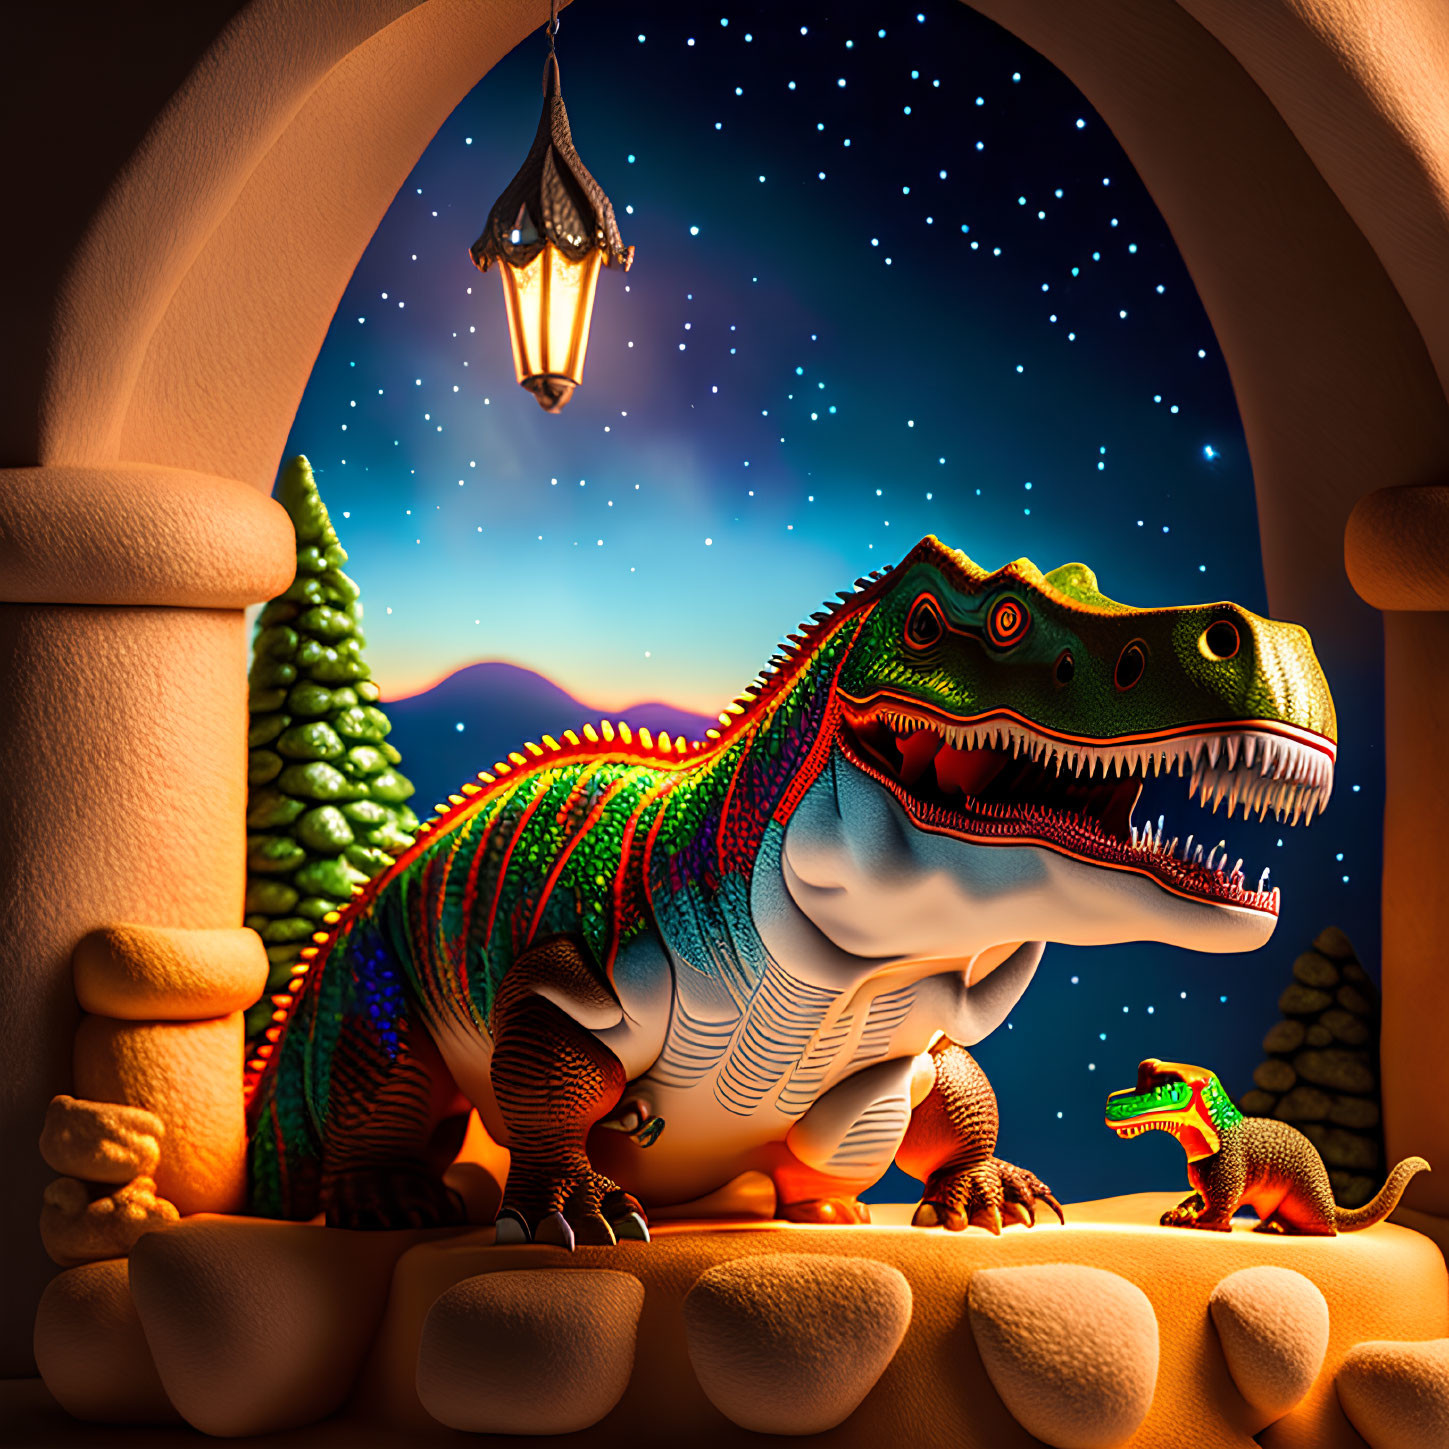 Two dinosaurs in stone window under starry sky with lantern